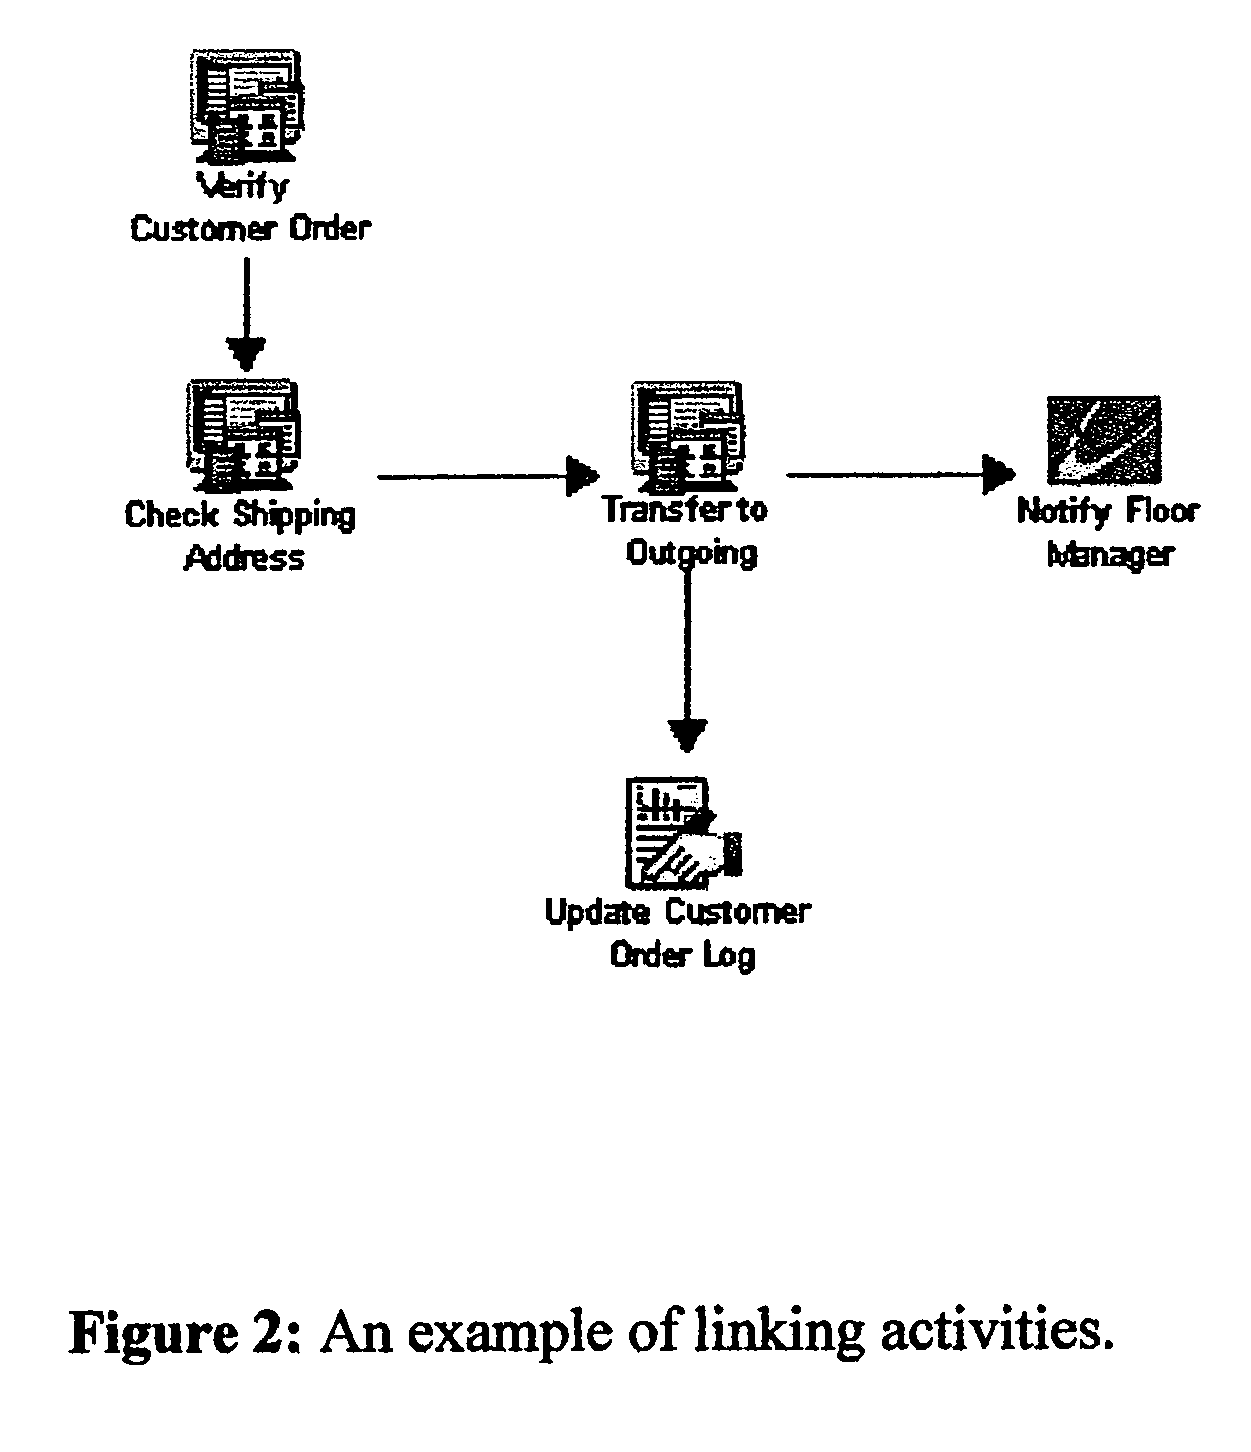 System and method for the composition, generation, integration and execution of business processes over a network